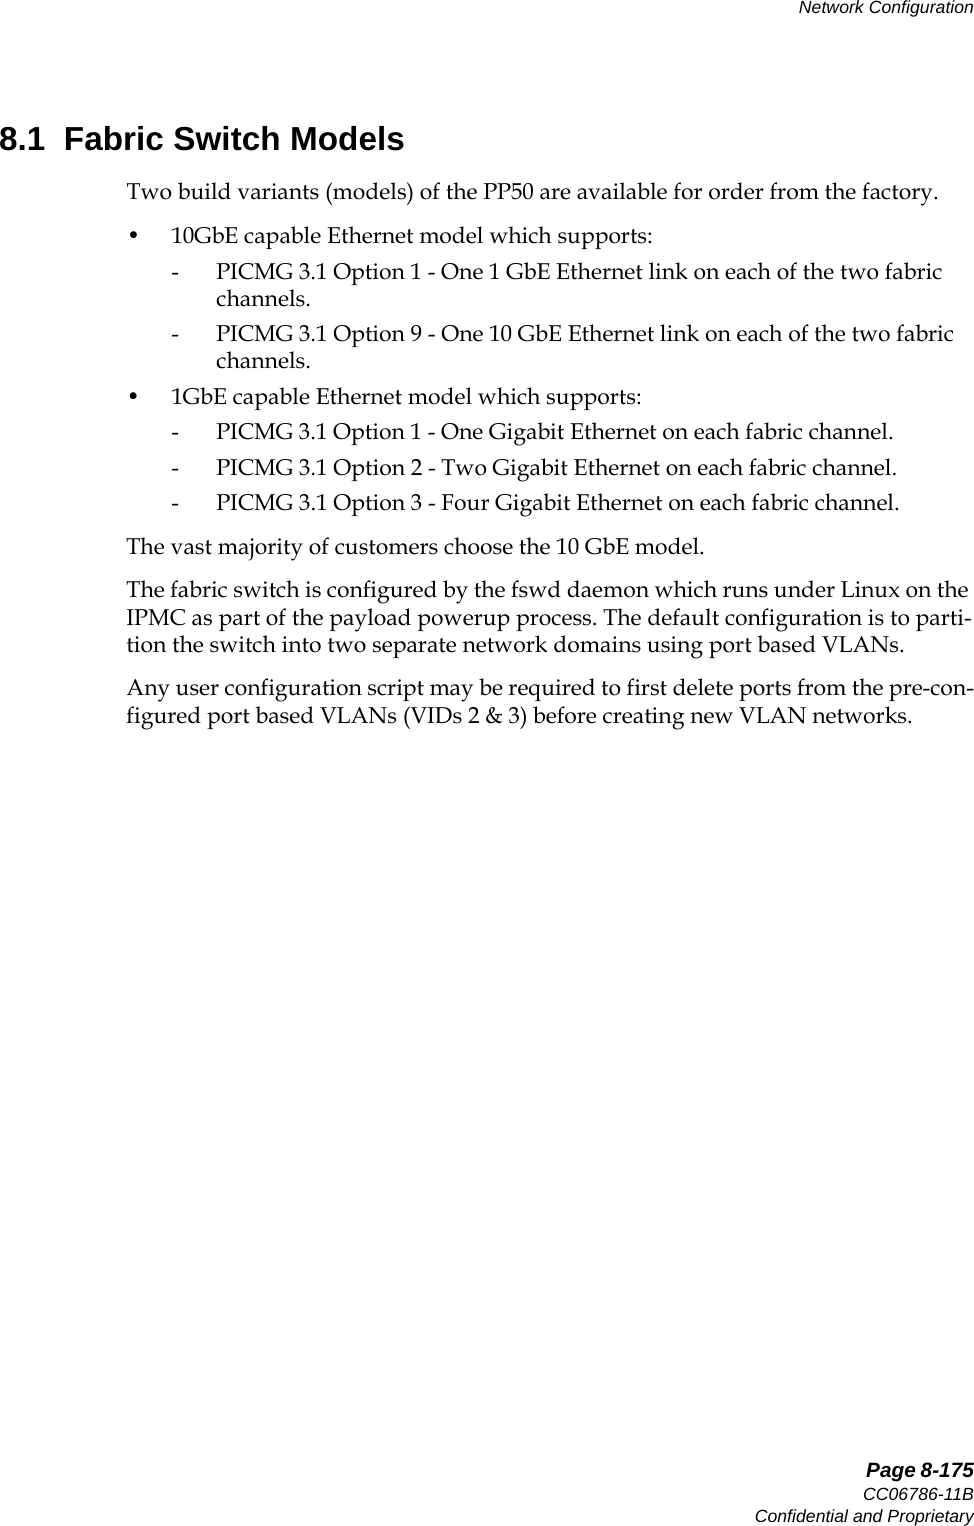   Page 8-175CC06786-11BConfidential and ProprietaryNetwork Configuration14ABABPreliminary8.1  Fabric Switch ModelsTwo build variants (models) of the PP50 are available for order from the factory.• 10GbE capable Ethernet model which supports:- PICMG 3.1 Option 1 - One 1 GbE Ethernet link on each of the two fabric channels.- PICMG 3.1 Option 9 - One 10 GbE Ethernet link on each of the two fabric channels.• 1GbE capable Ethernet model which supports:- PICMG 3.1 Option 1 - One Gigabit Ethernet on each fabric channel.- PICMG 3.1 Option 2 - Two Gigabit Ethernet on each fabric channel.- PICMG 3.1 Option 3 - Four Gigabit Ethernet on each fabric channel.The vast majority of customers choose the 10 GbE model.The fabric switch is configured by the fswd daemon which runs under Linux on the IPMC as part of the payload powerup process. The default configuration is to parti-tion the switch into two separate network domains using port based VLANs.Any user configuration script may be required to first delete ports from the pre-con-figured port based VLANs (VIDs 2 &amp; 3) before creating new VLAN networks.